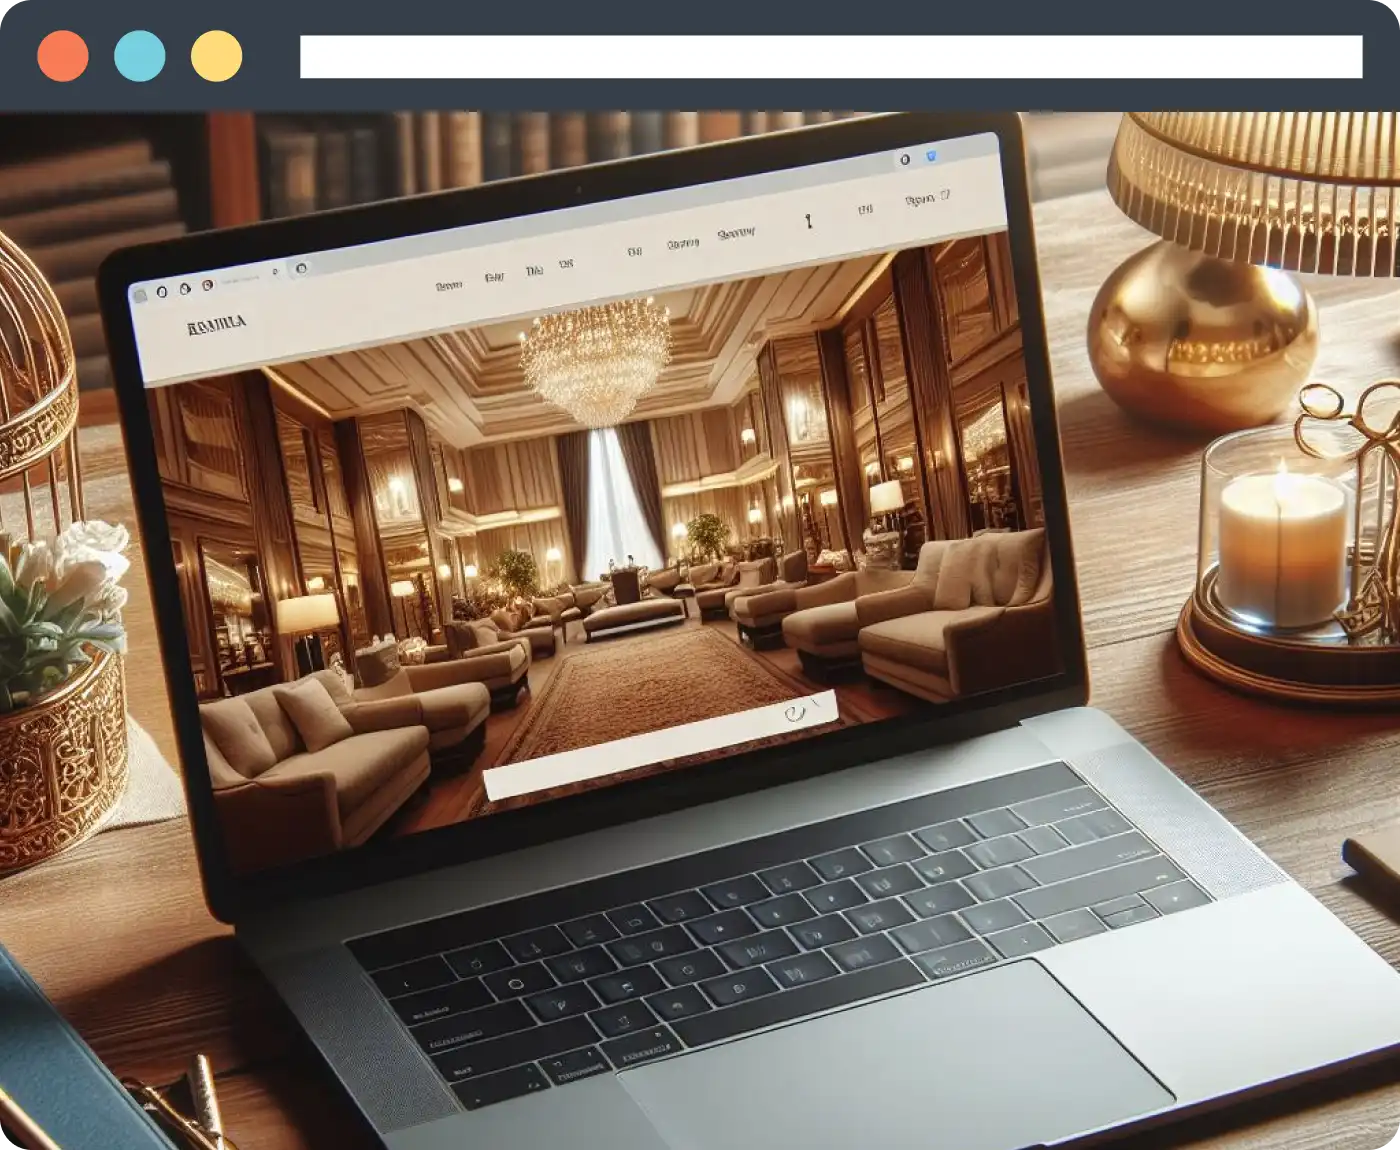 A homepage of a luxurious hotel website opened on a laptop